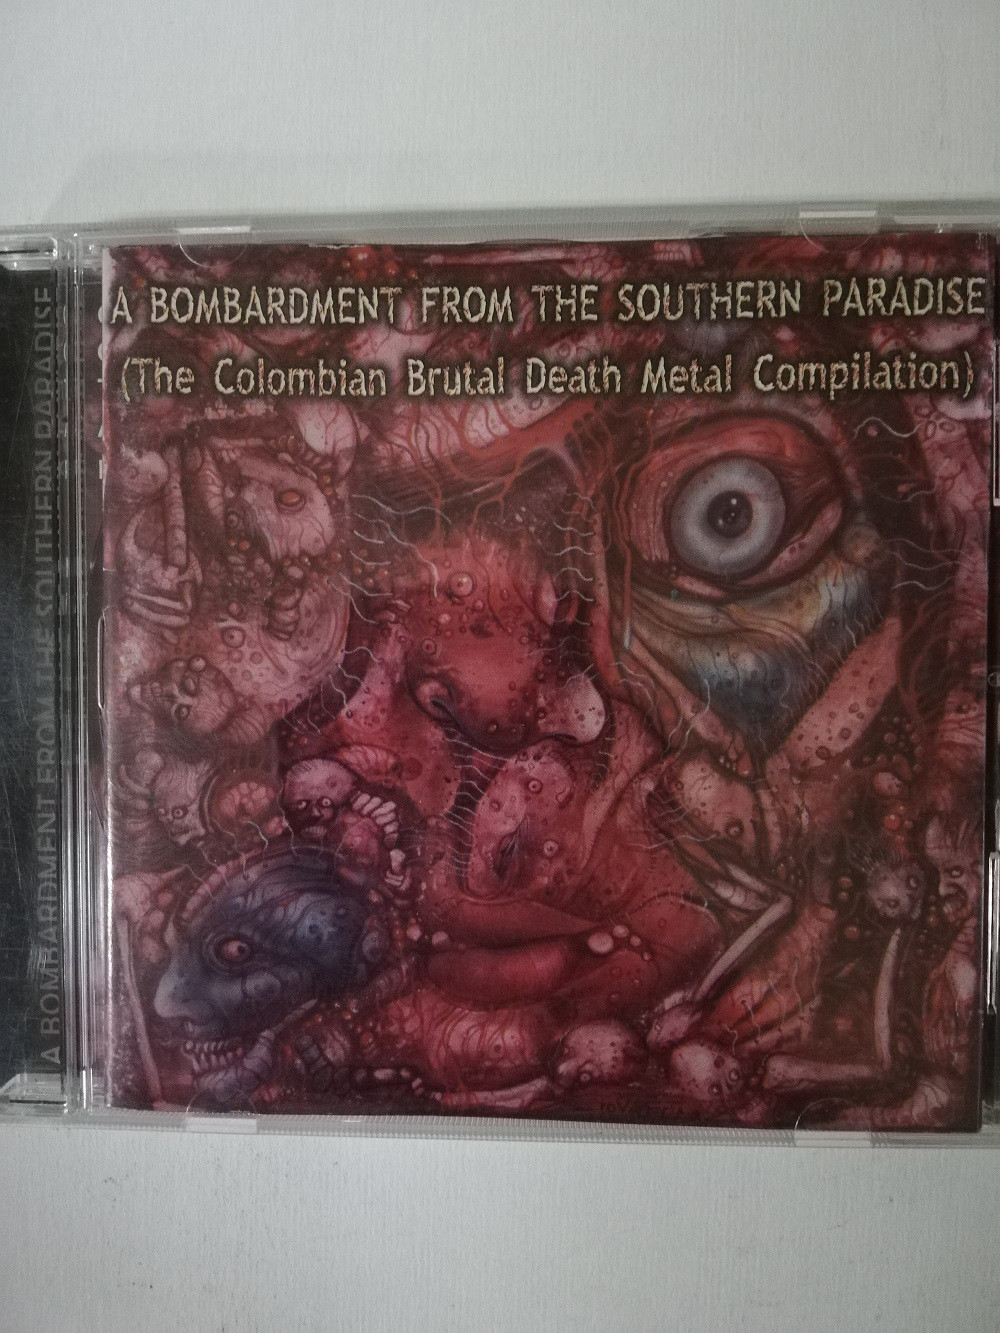 Imagen CD A BOMBARDMENT FROM SOUTHERN PARADISE - THE COLOMBIAN BRUTAL DEATH COMPILATION